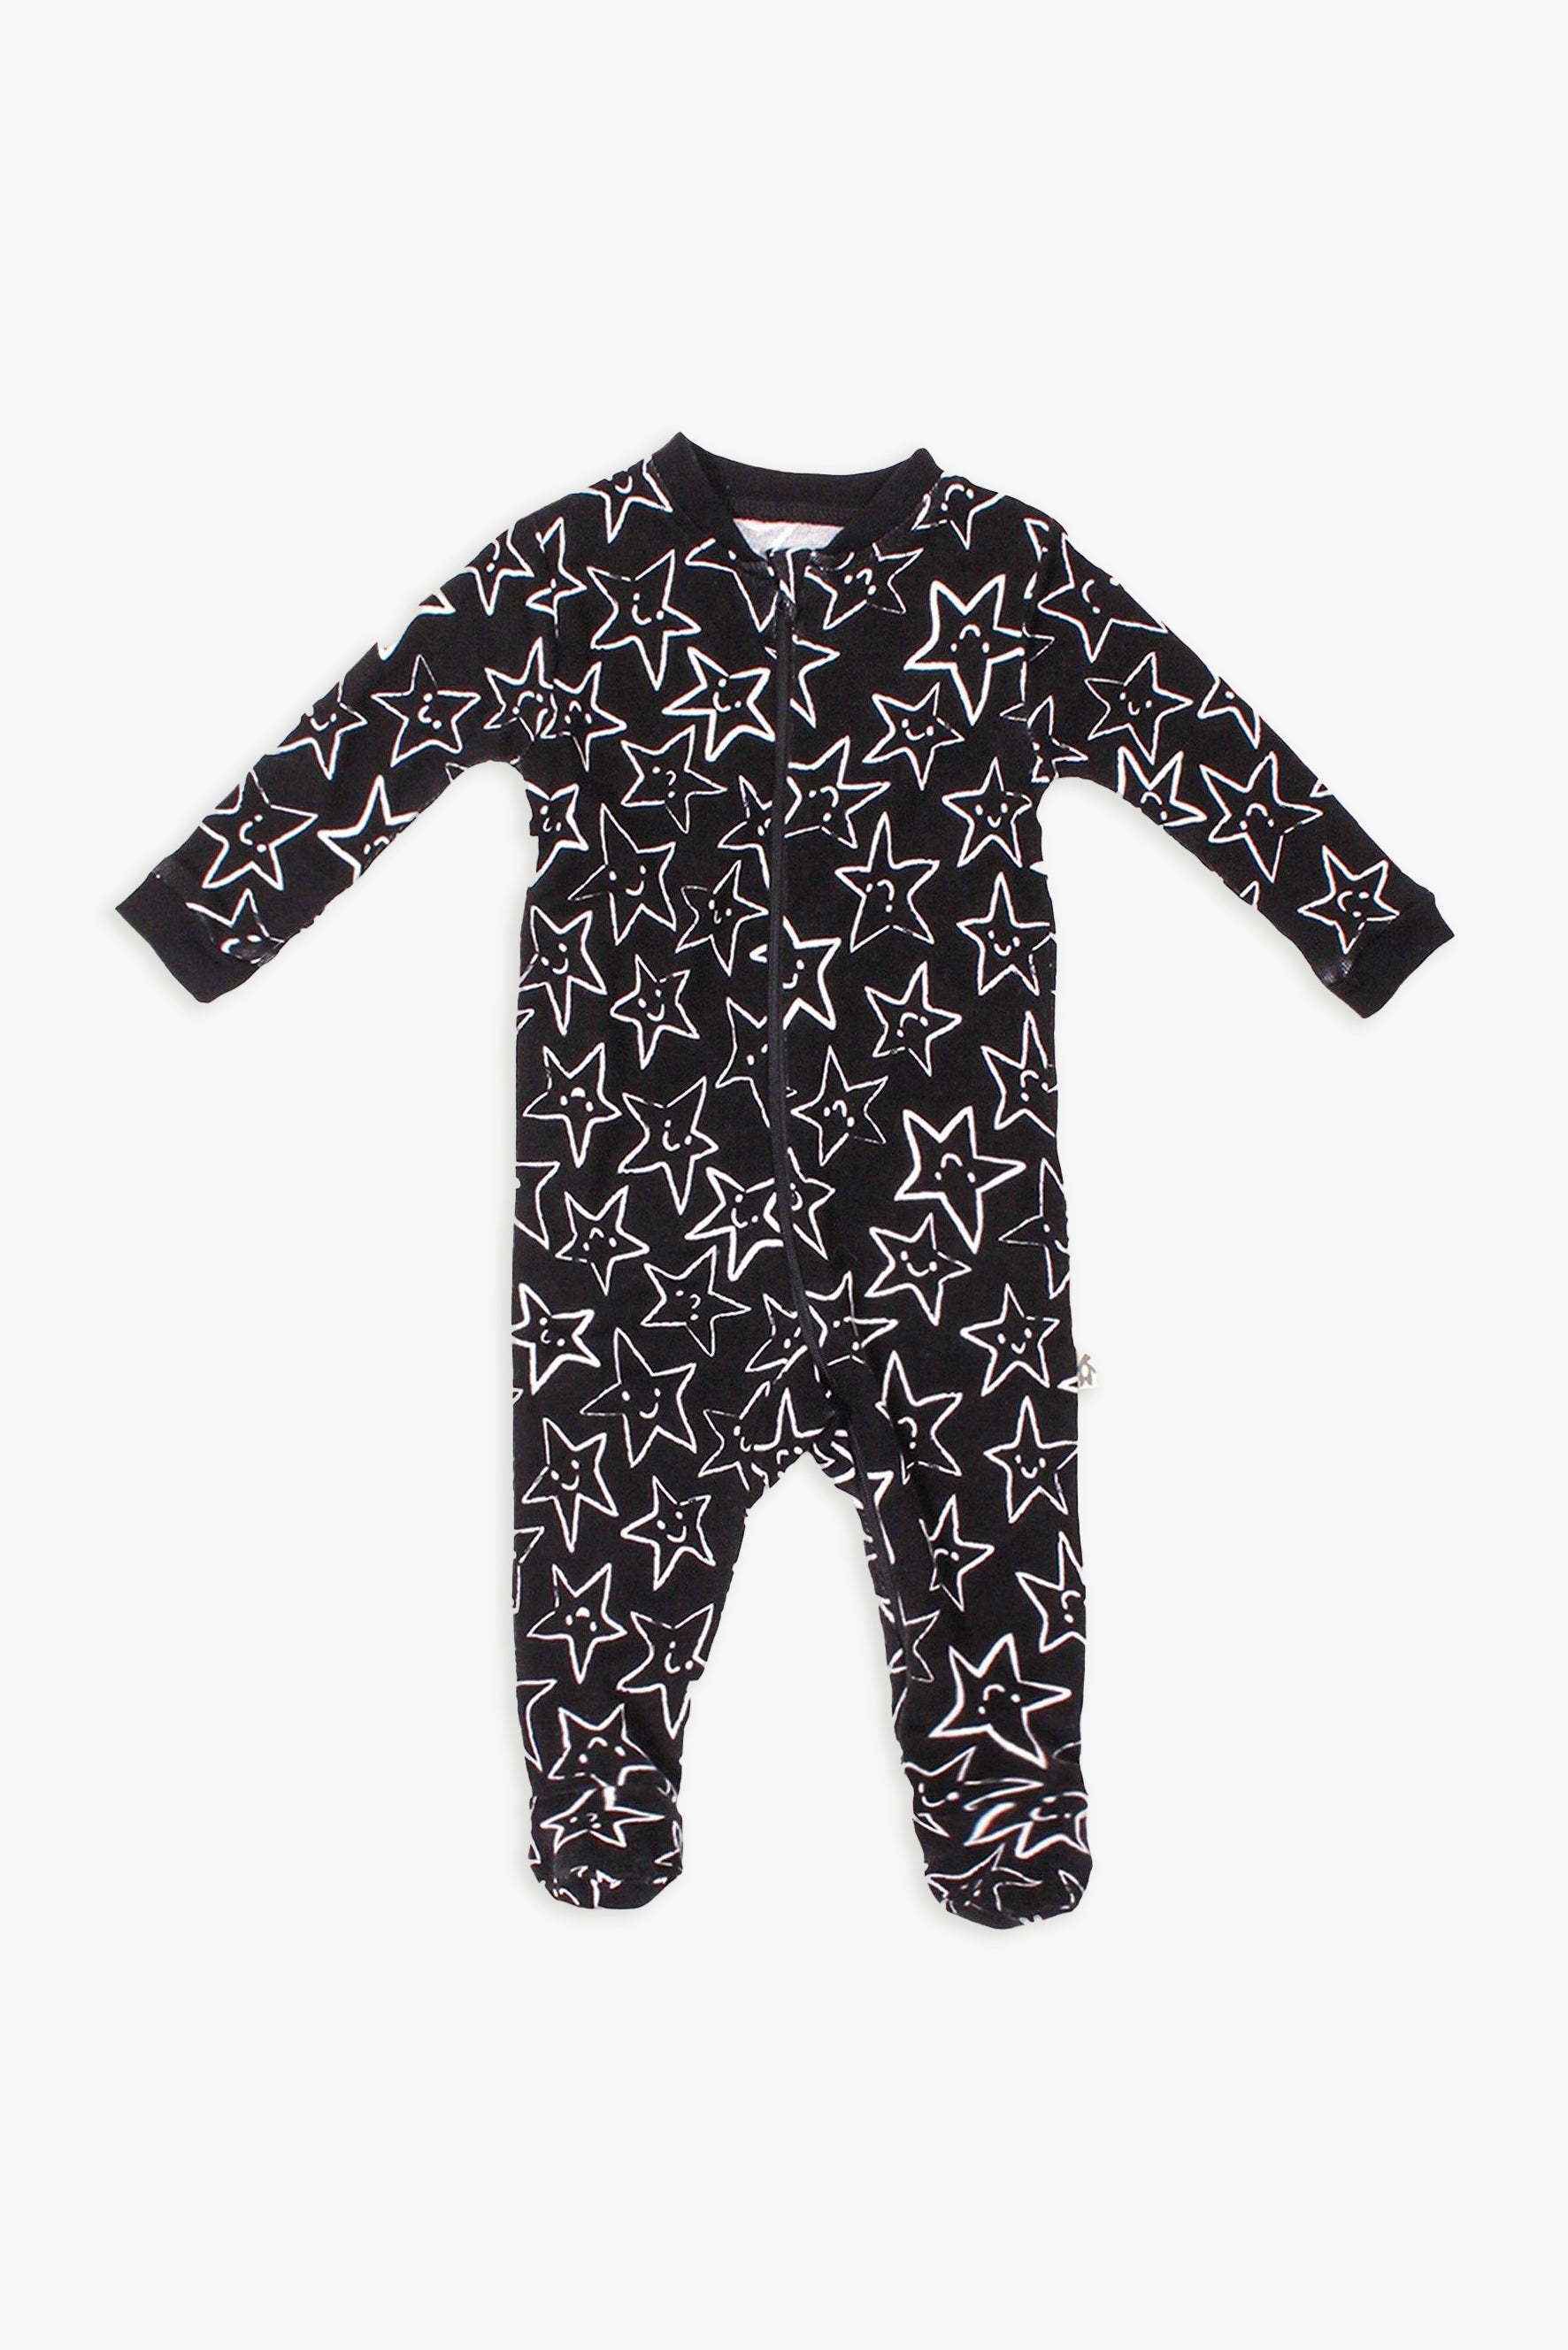 Black & White Stars Footed Sleeper with Front Zip